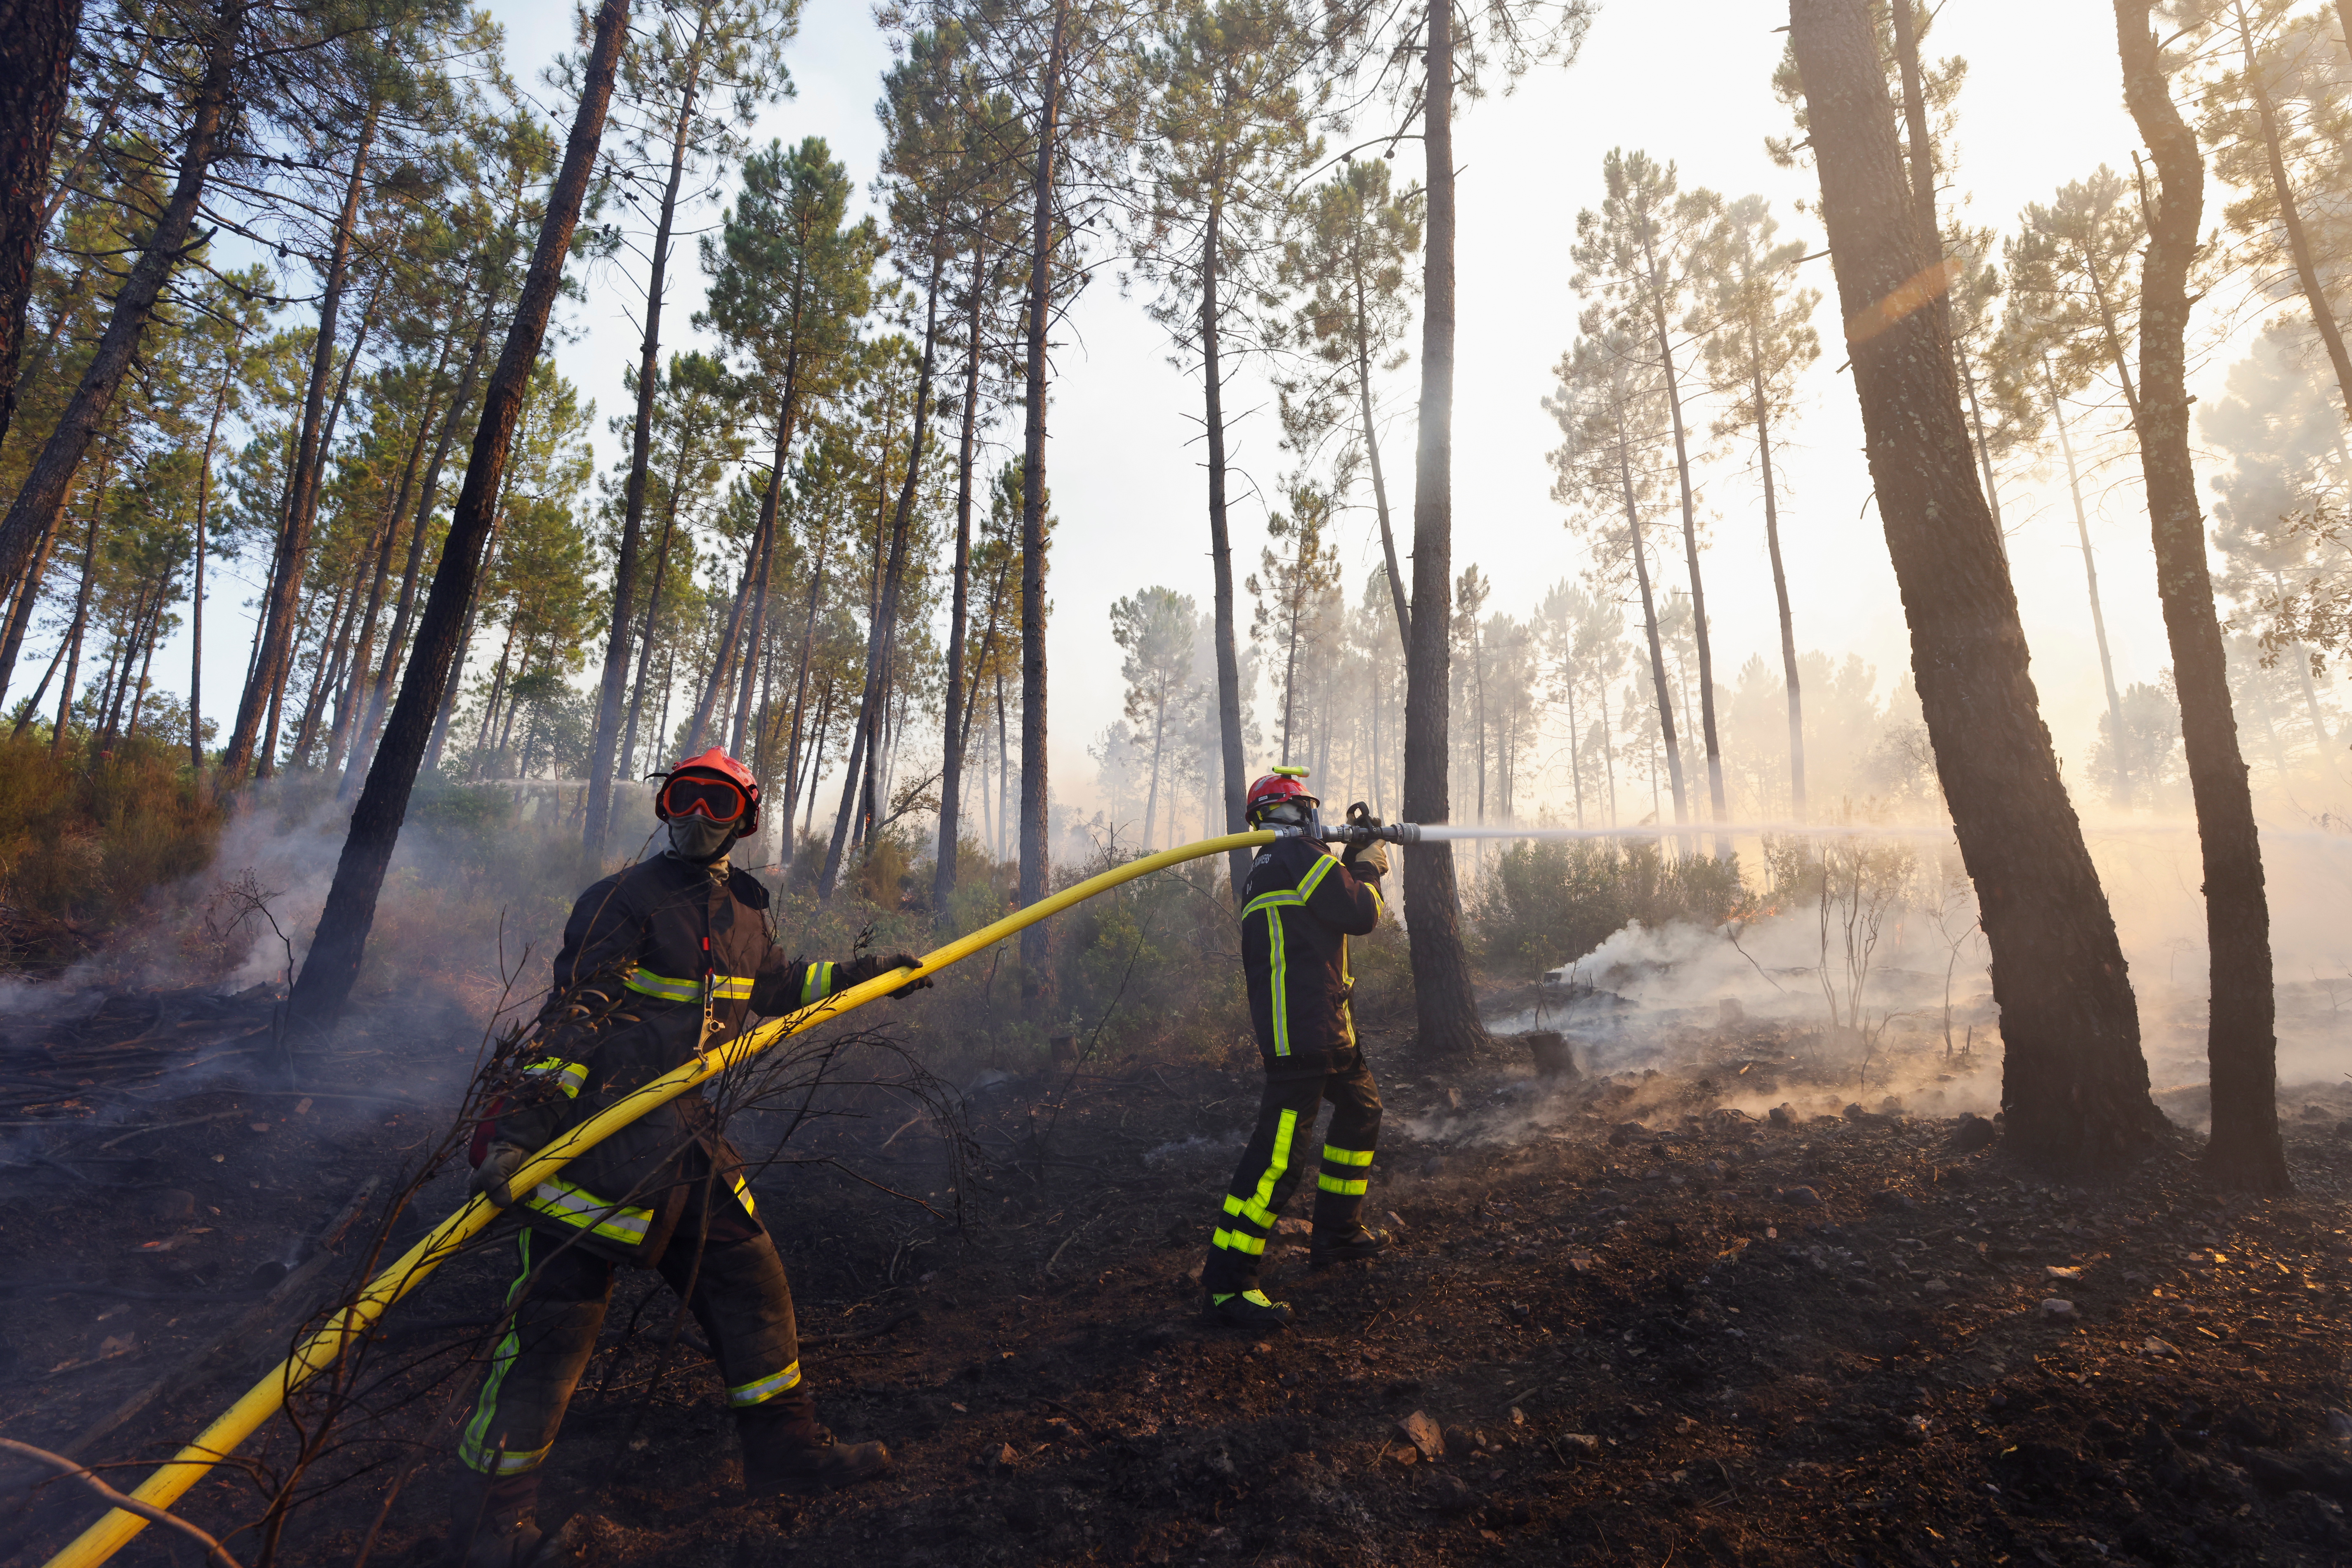 Firefighters extinguish a fire that broke out in Vidauban, in the Var region of southern France, August 18, 2021. REUTERS/Eric Gaillard